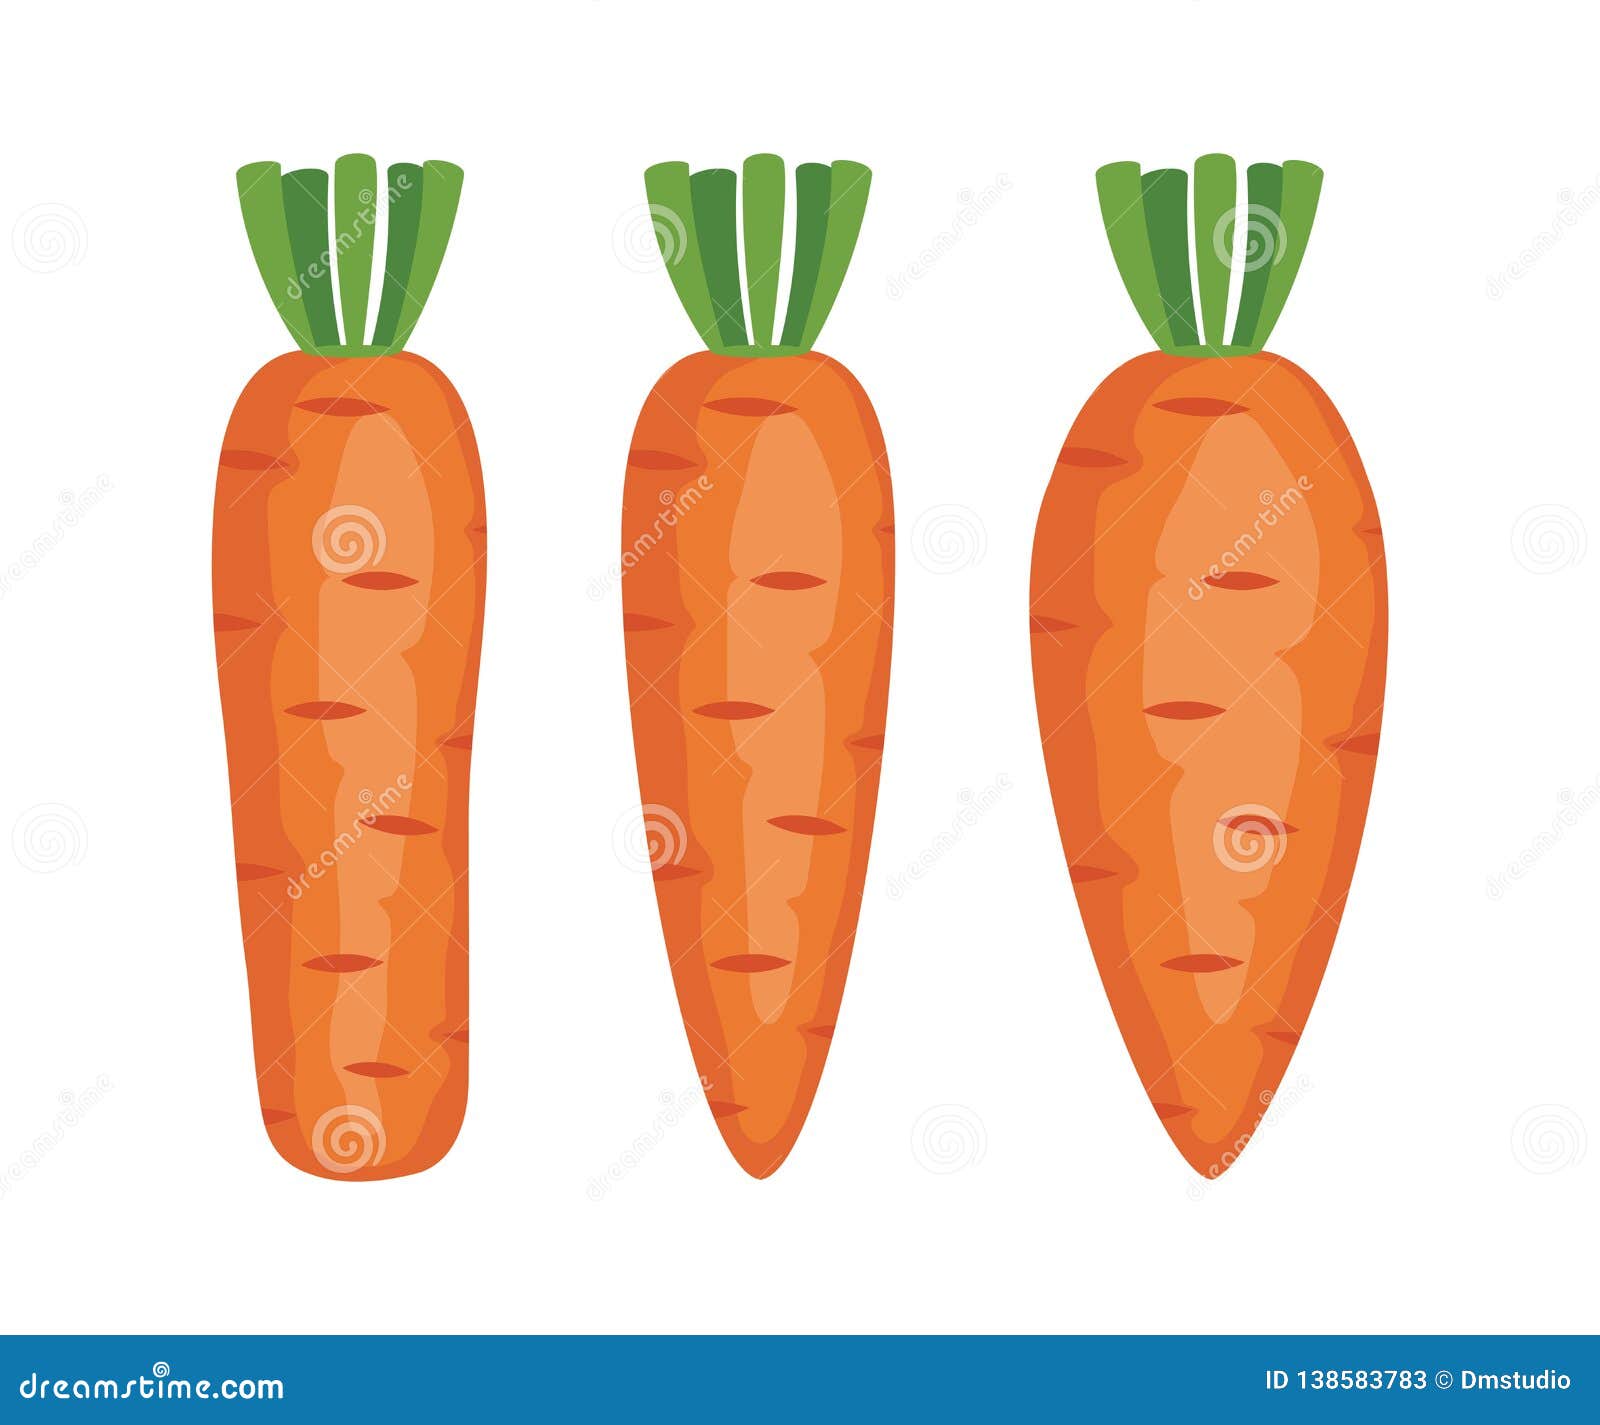 Carrots Cartoons, Illustrations & Vector Stock Images - 29469 Pictures ...